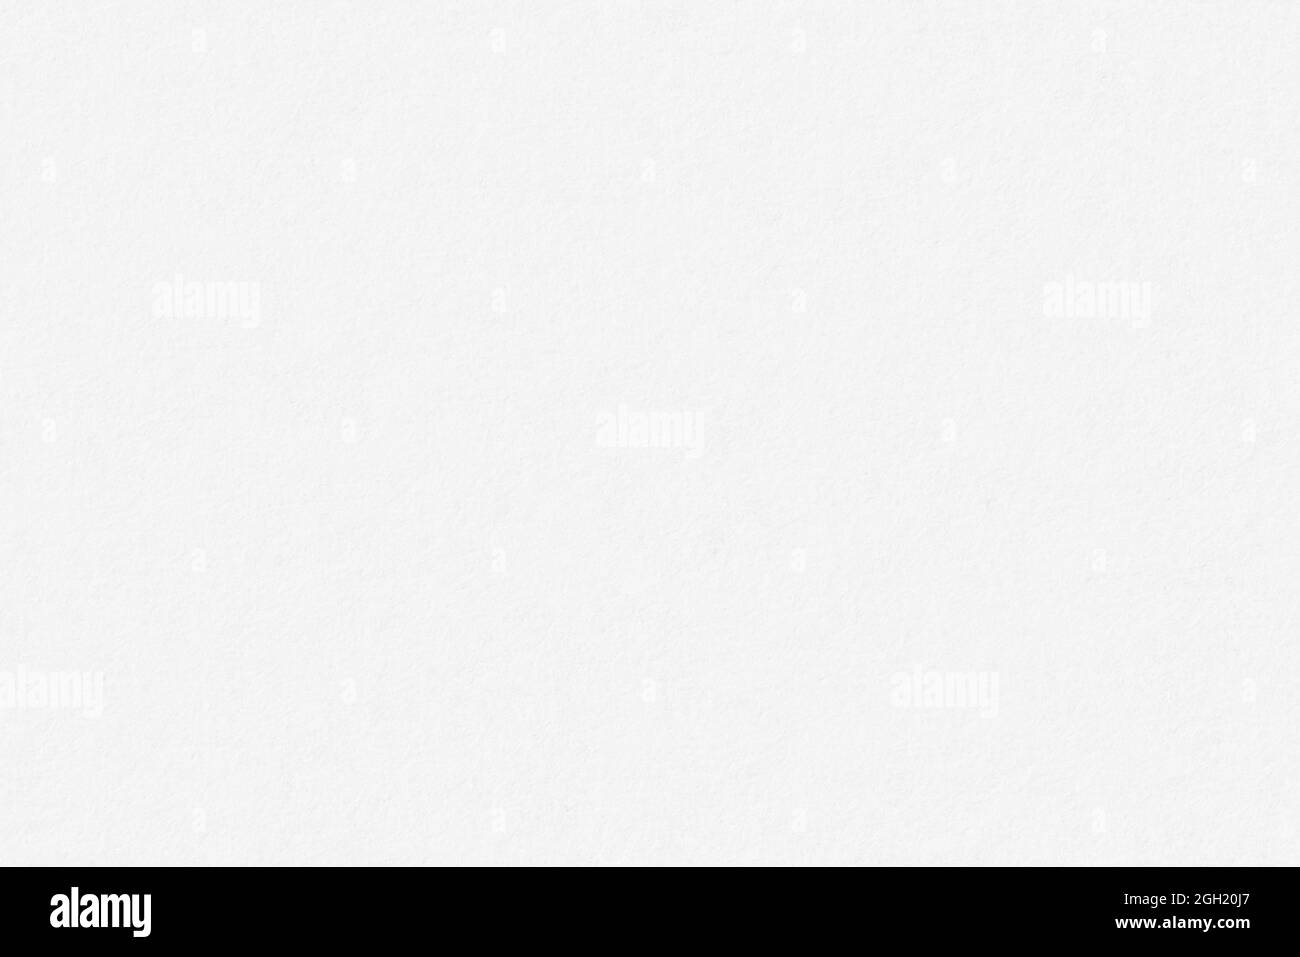 Plain white paper texture background with tileable seamless repeating pattern Stock Photo